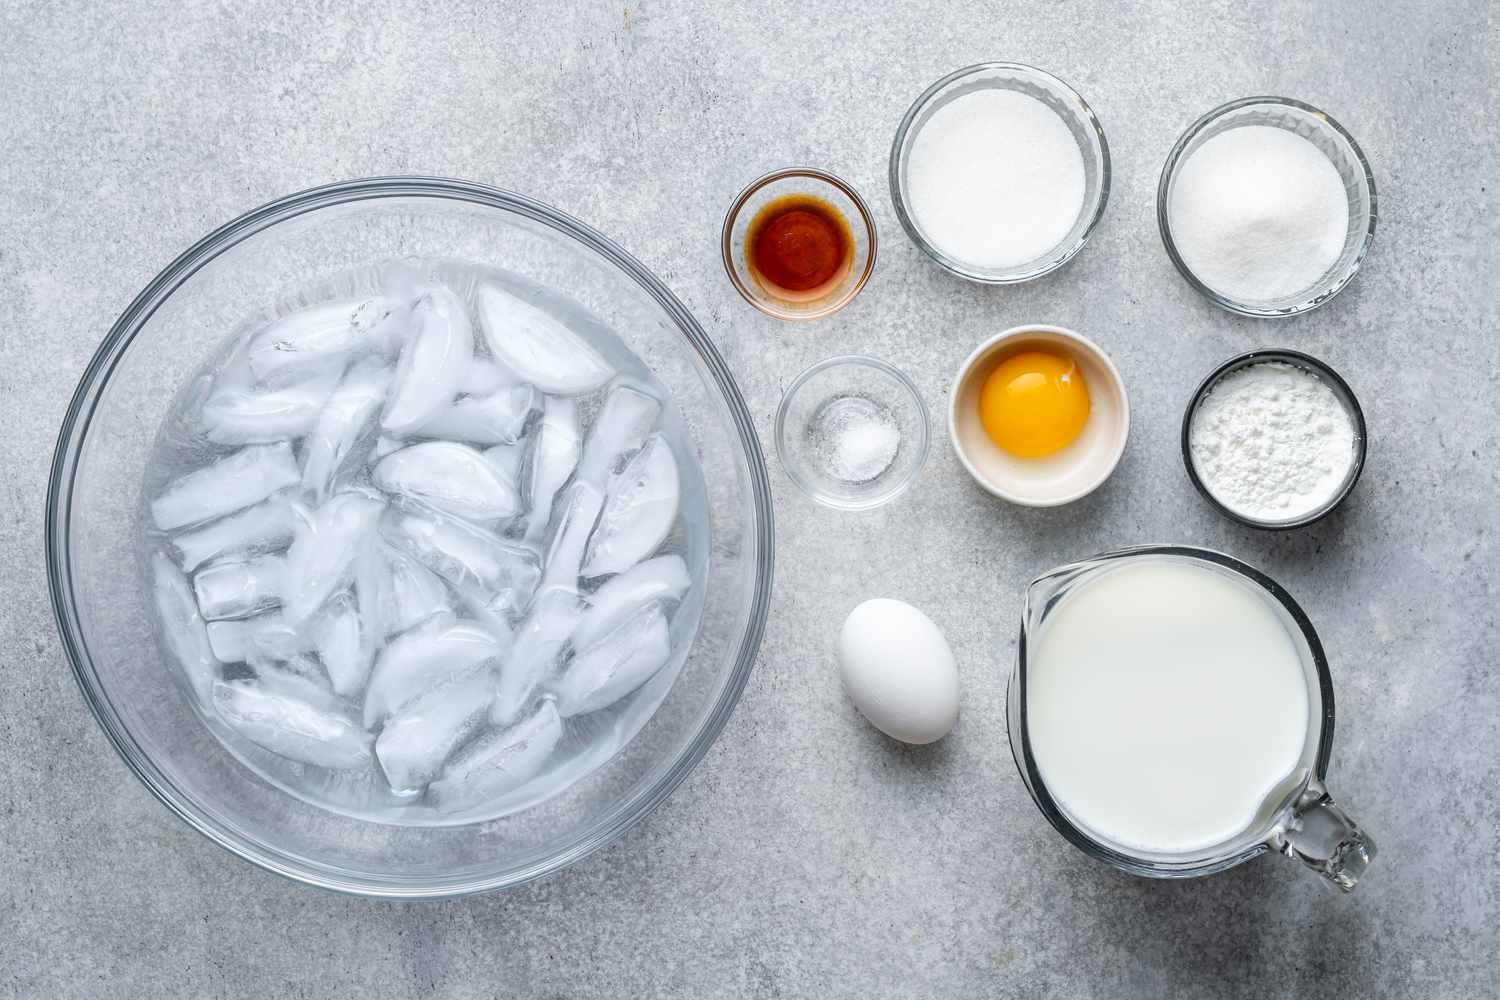 Ingredients to make pastry cream and a bowl with ice water